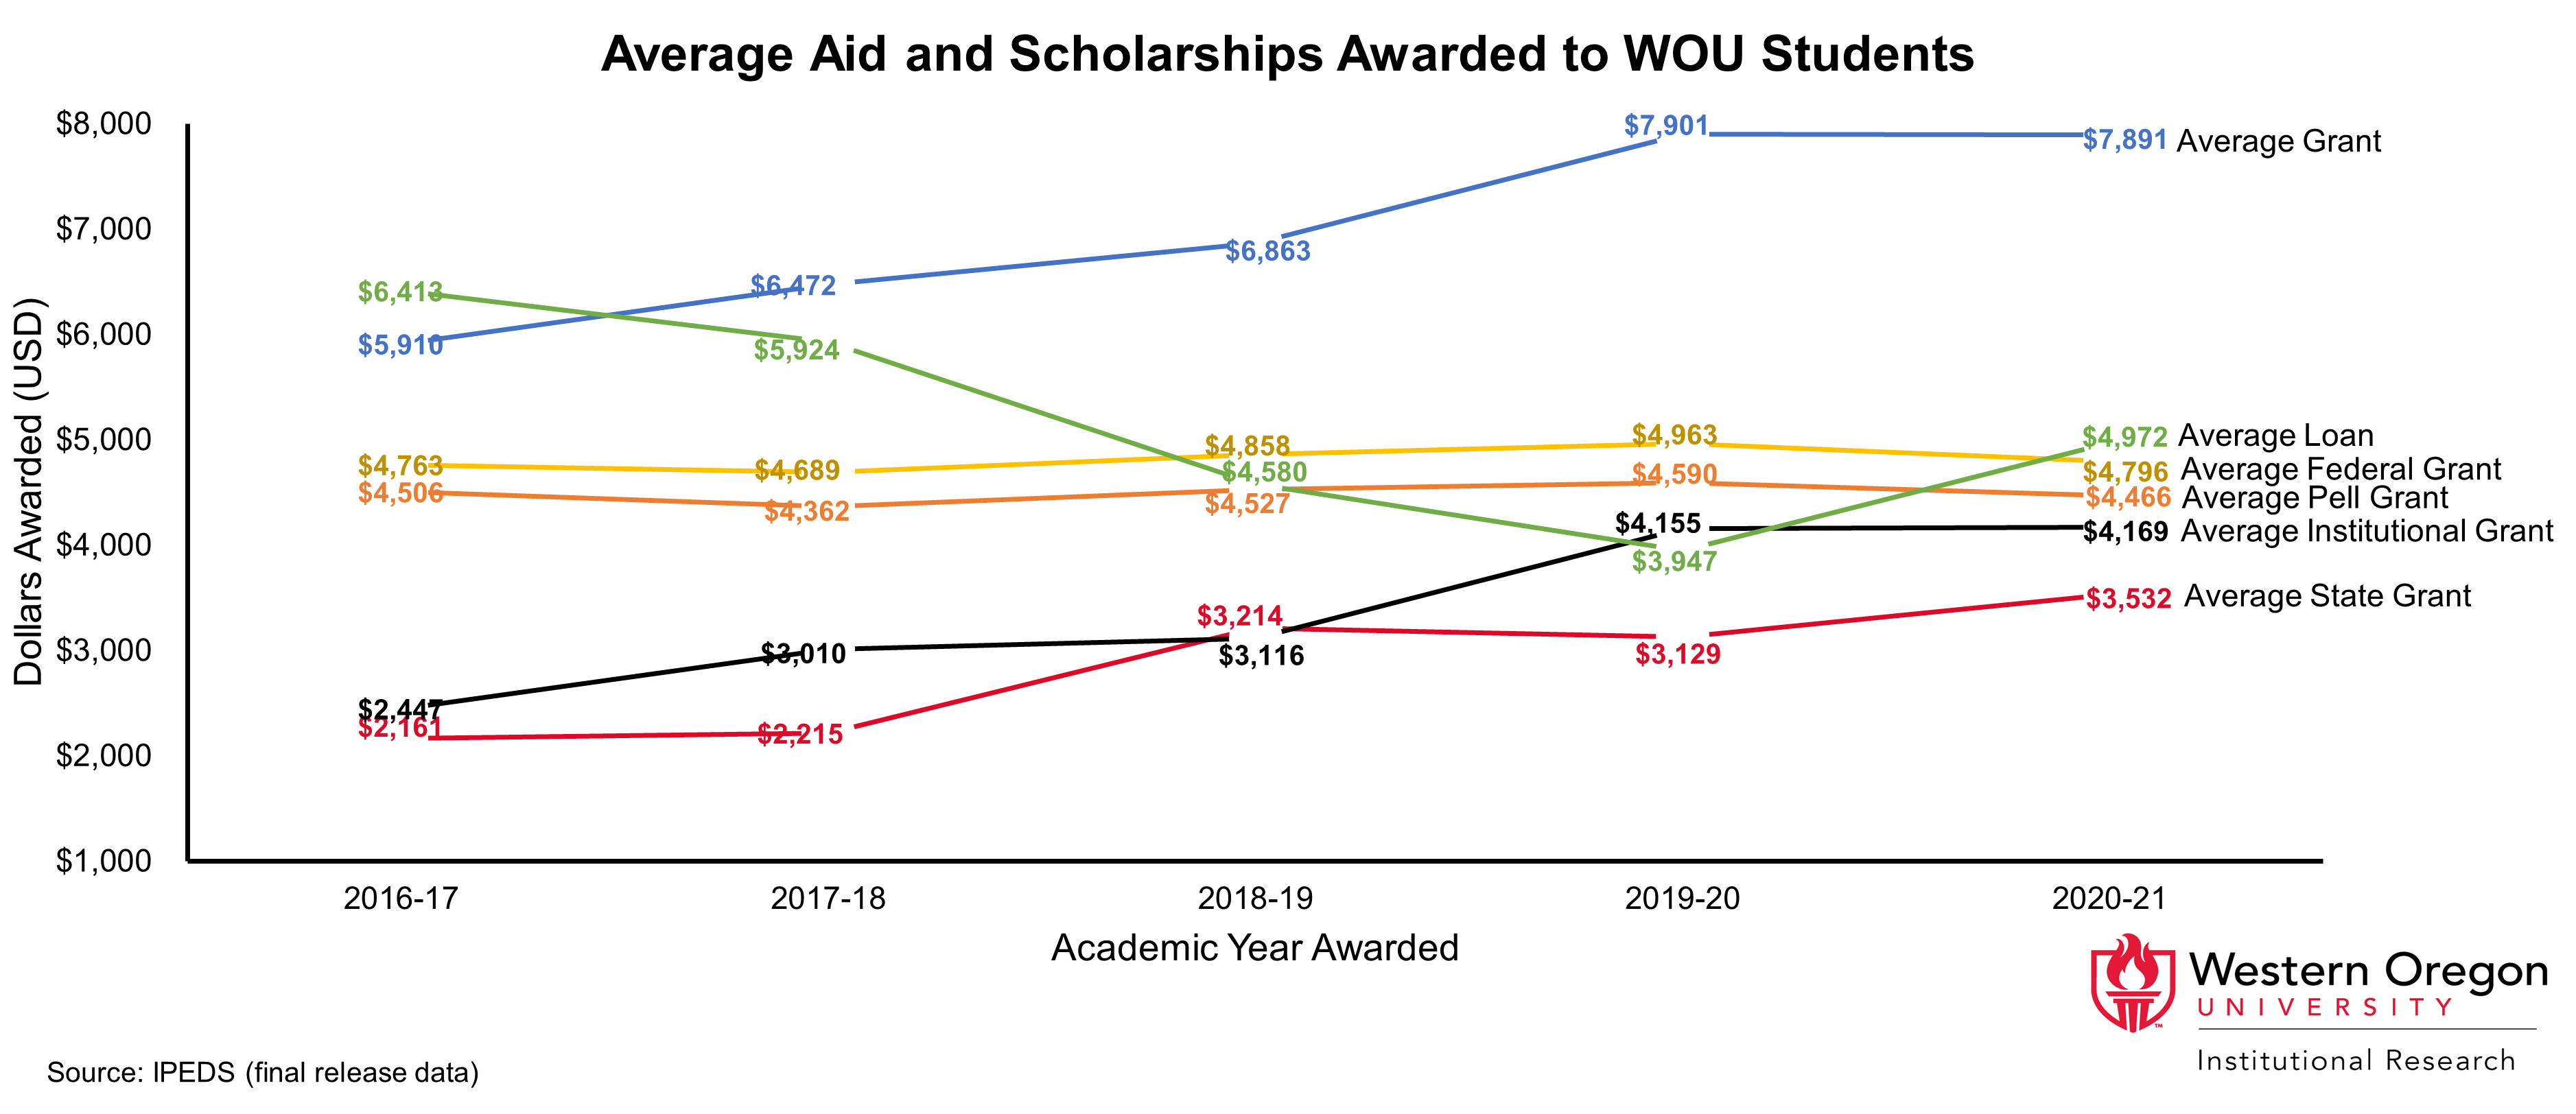 Line graph of average aid and scholarships awarded to WOU students from grants, pell grants, federal grants, state grants, institutional grants, and loans across 2017 to 2021